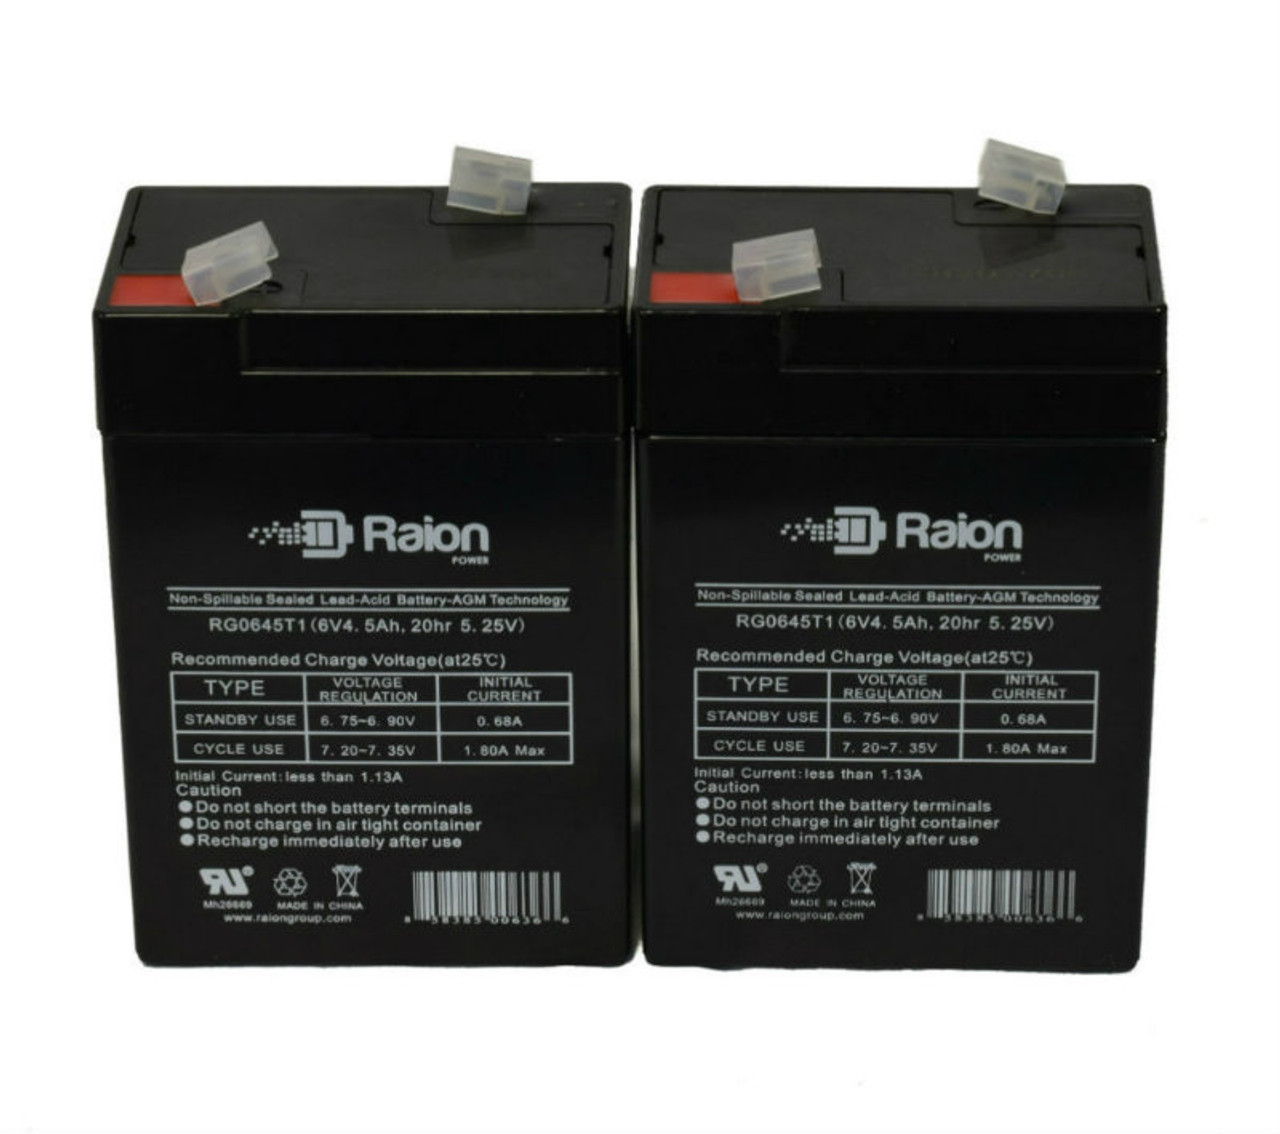 Raion Power 6 Volt 4.5Ah RG0645T1 Replacement Battery for R&D 5374 - 2 Pack